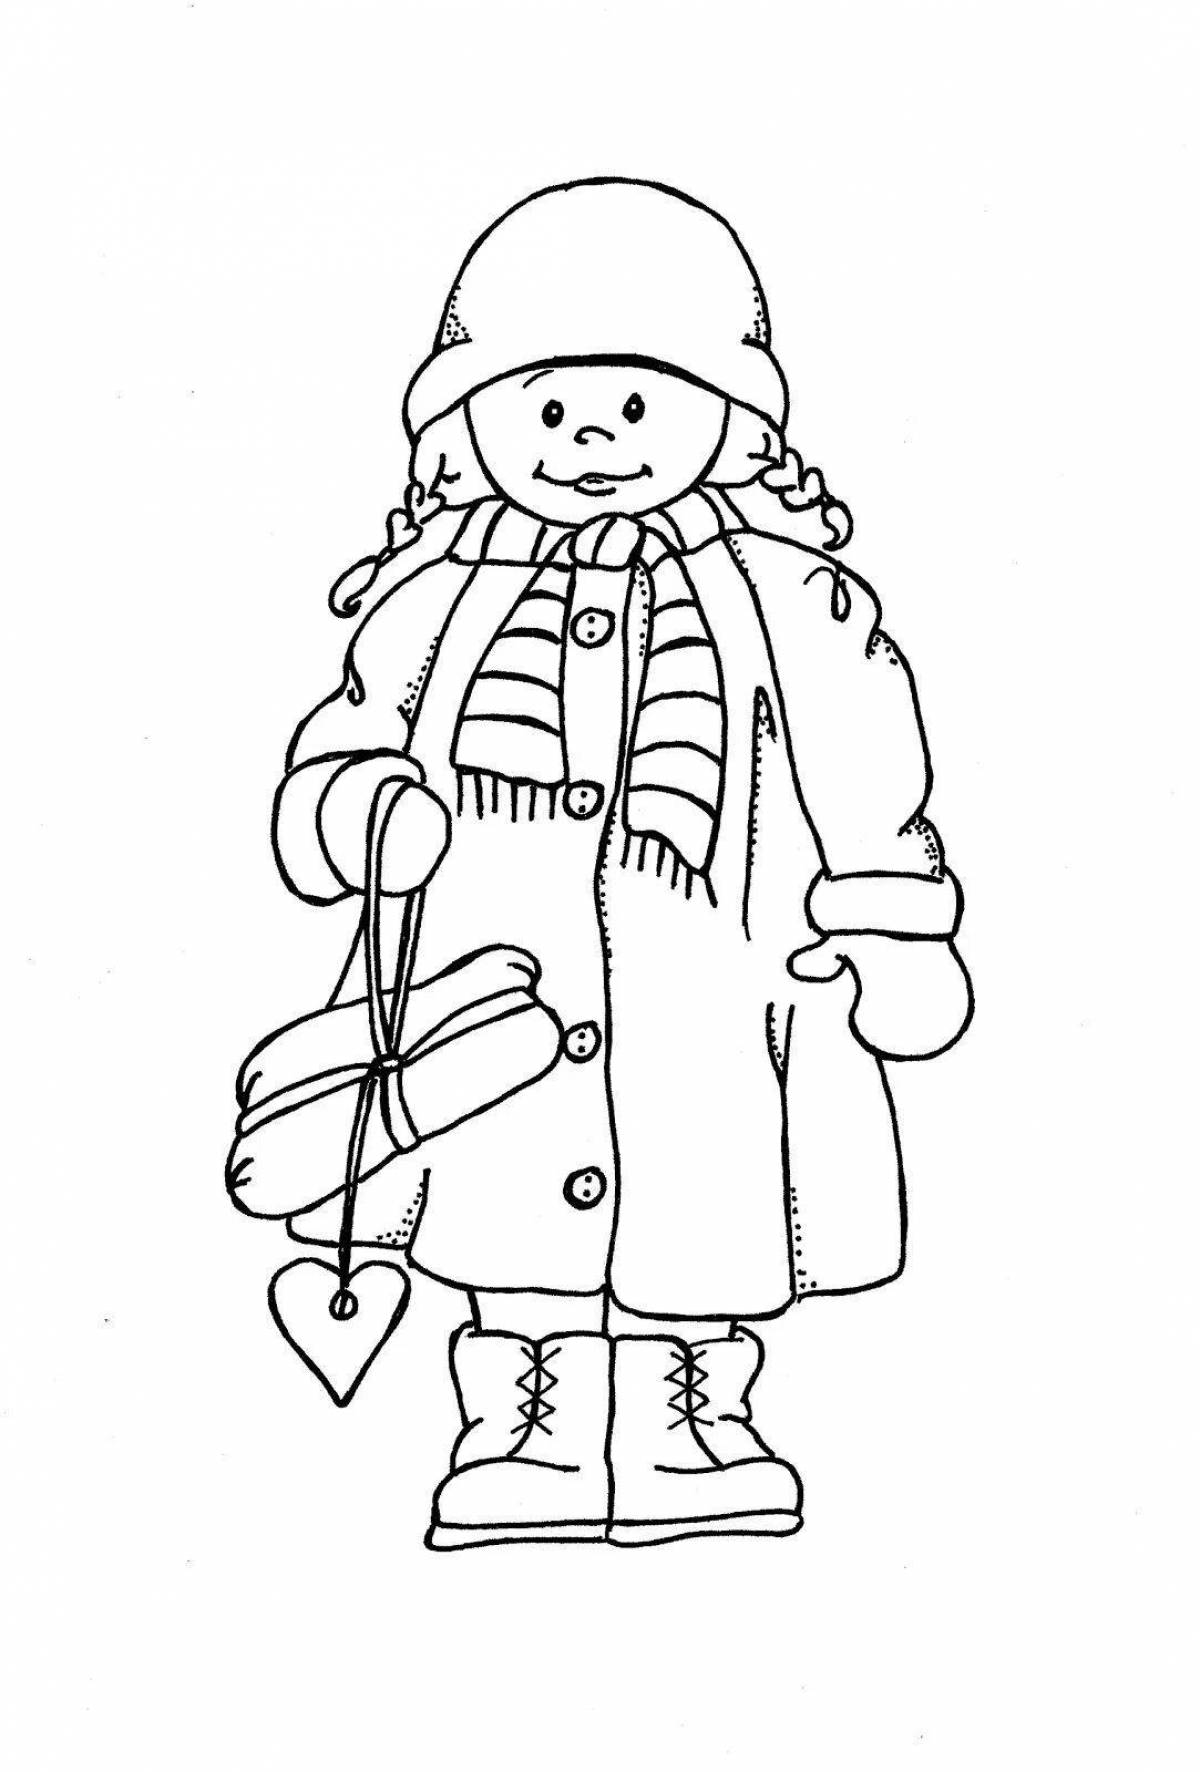 Animated winter clothes coloring page for 6-7 year olds